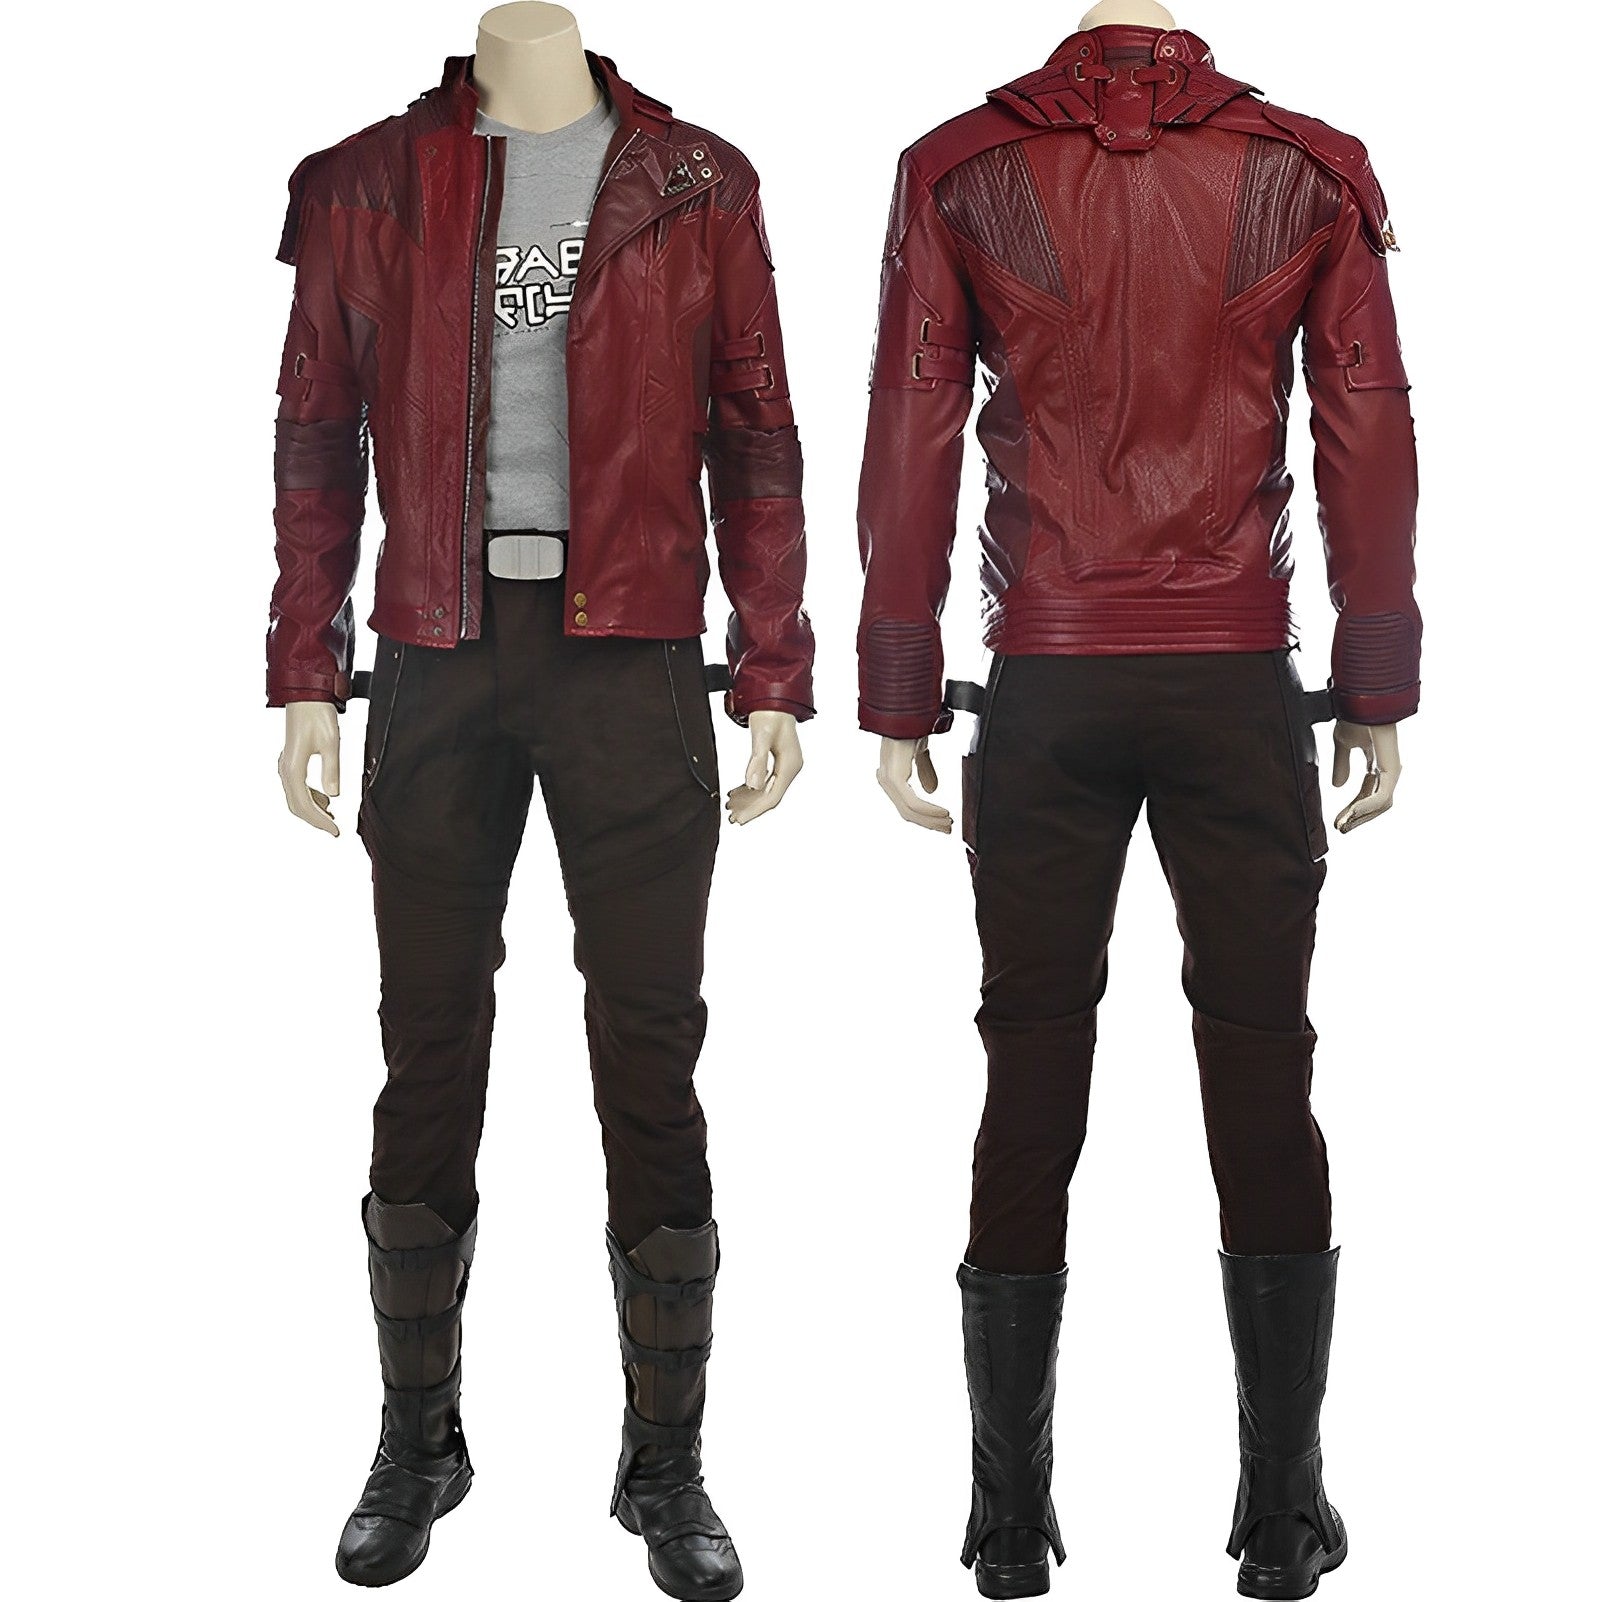 STAR LORD JACKET (GUARDIANS OF THE GALAXY)